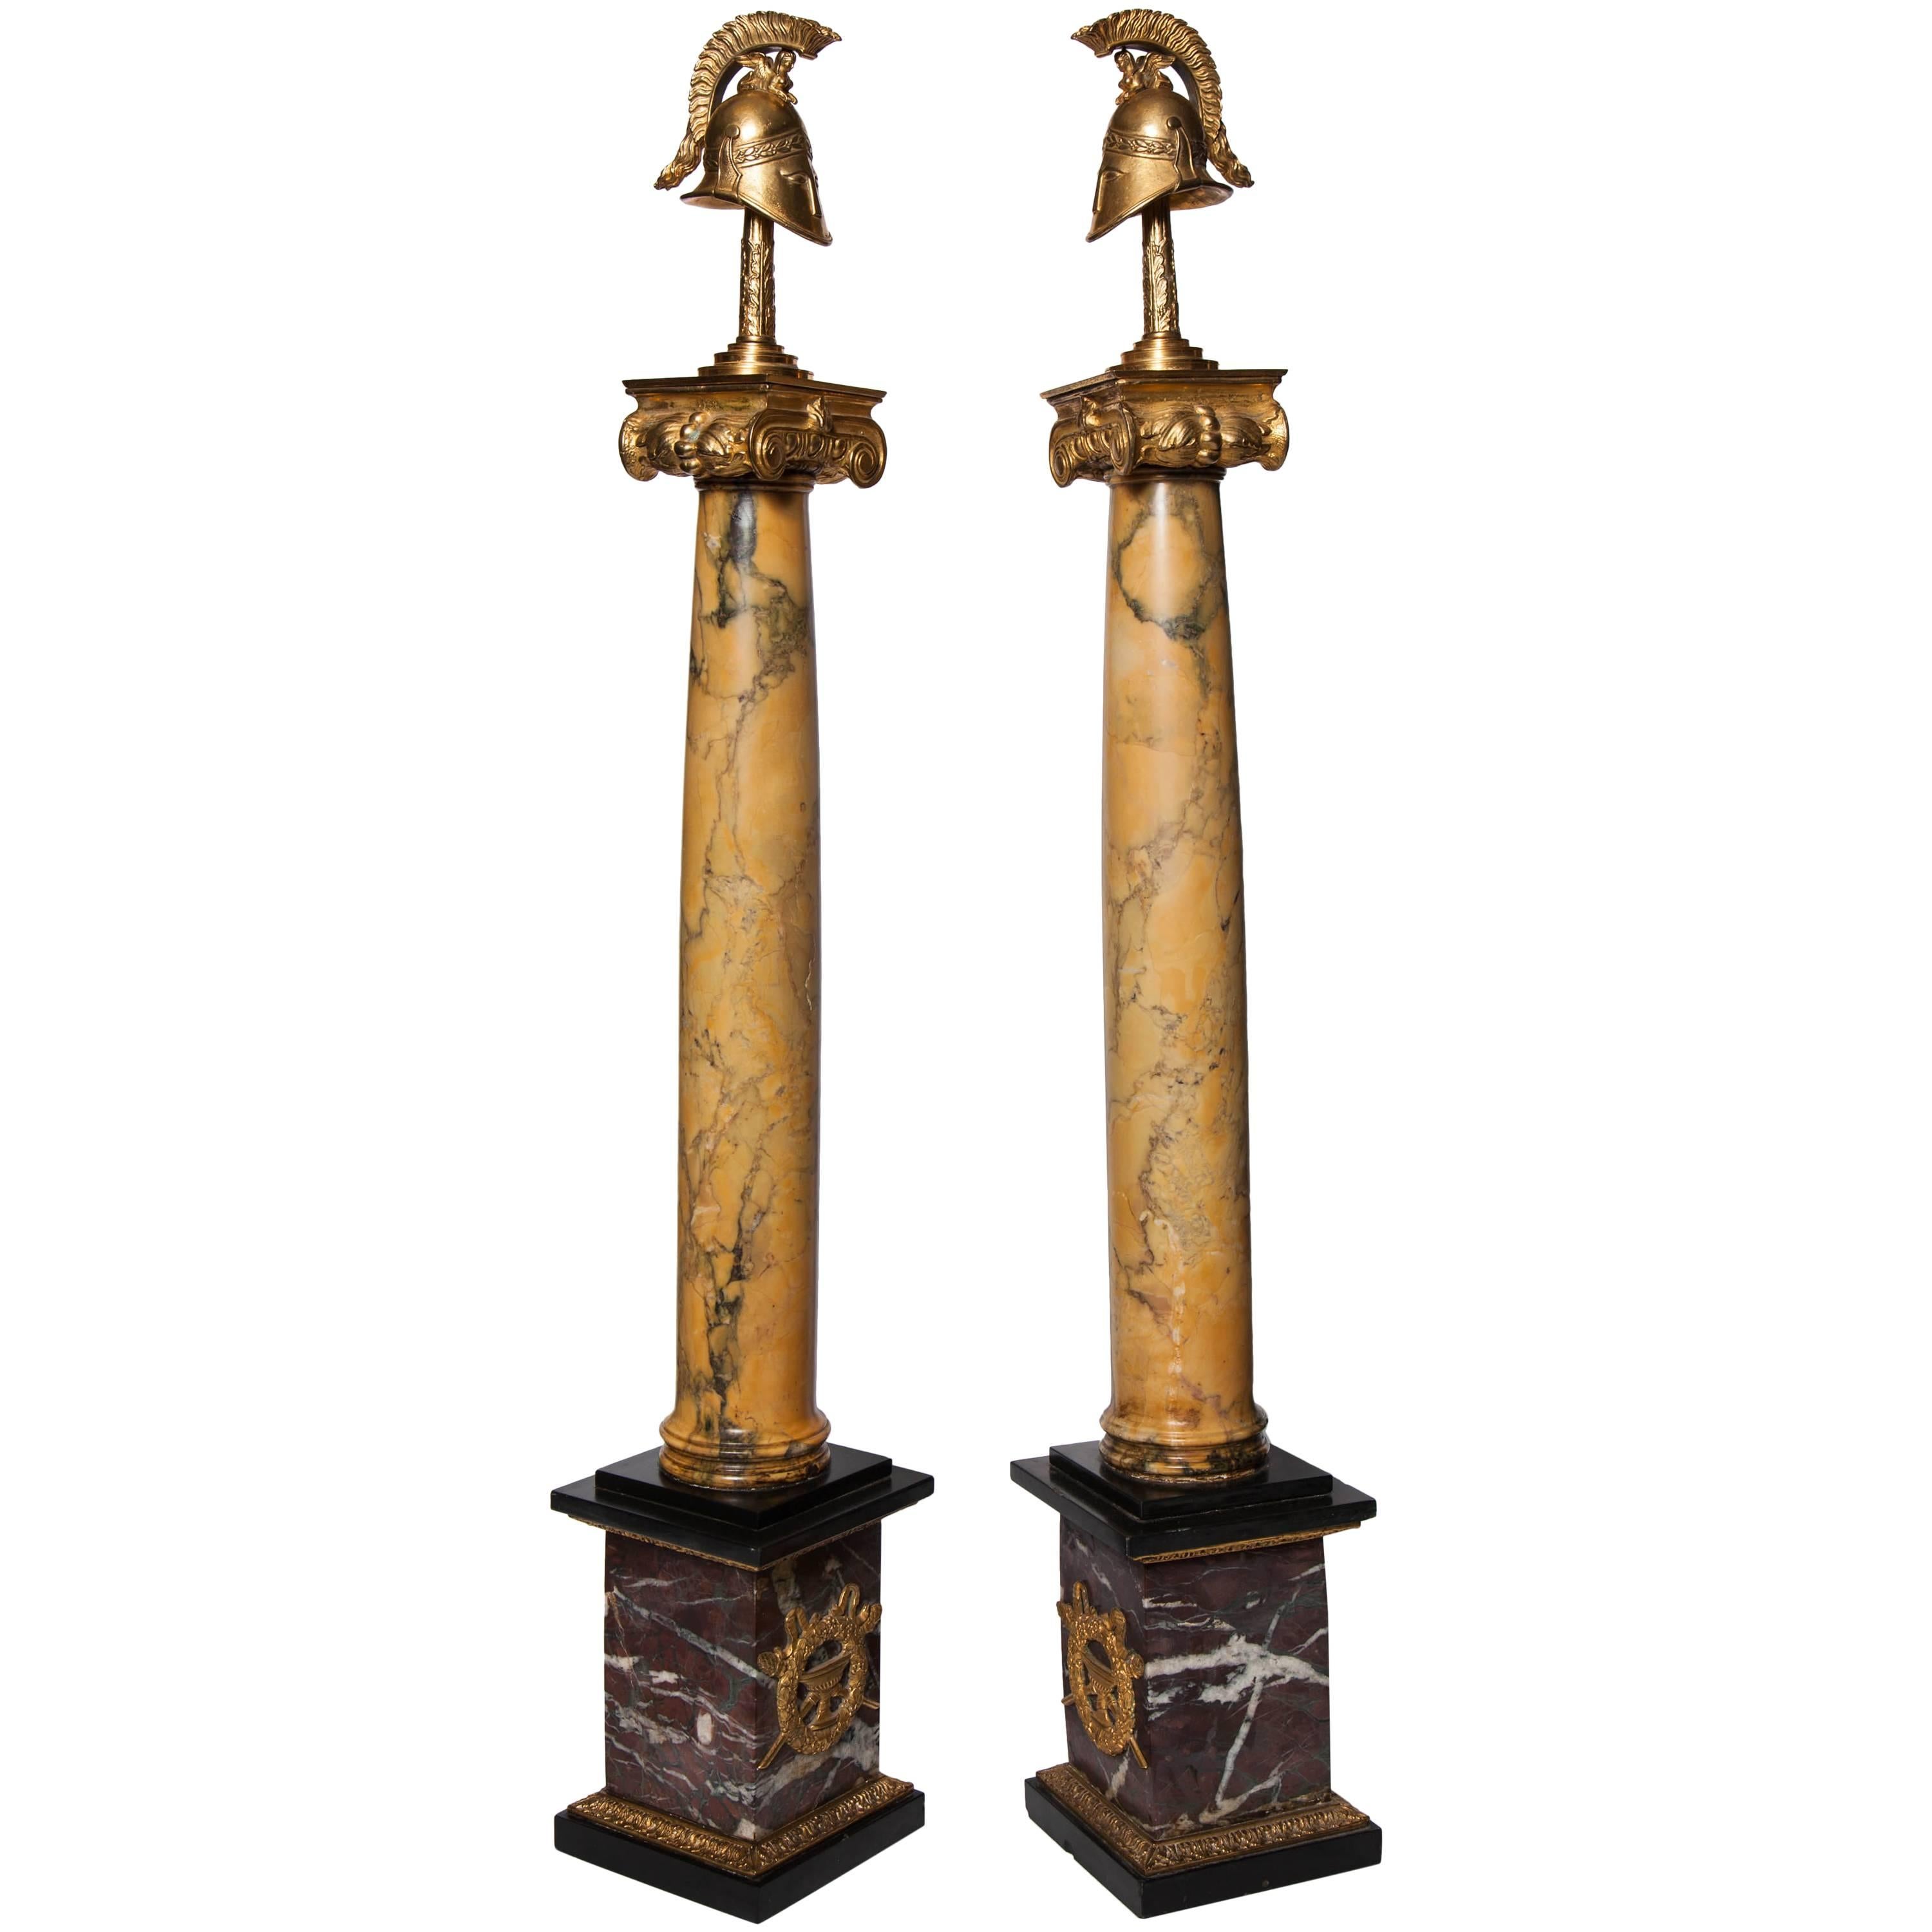 A Fine pair of Antique Russian sienna marble and jasper Helmet Military obelisks